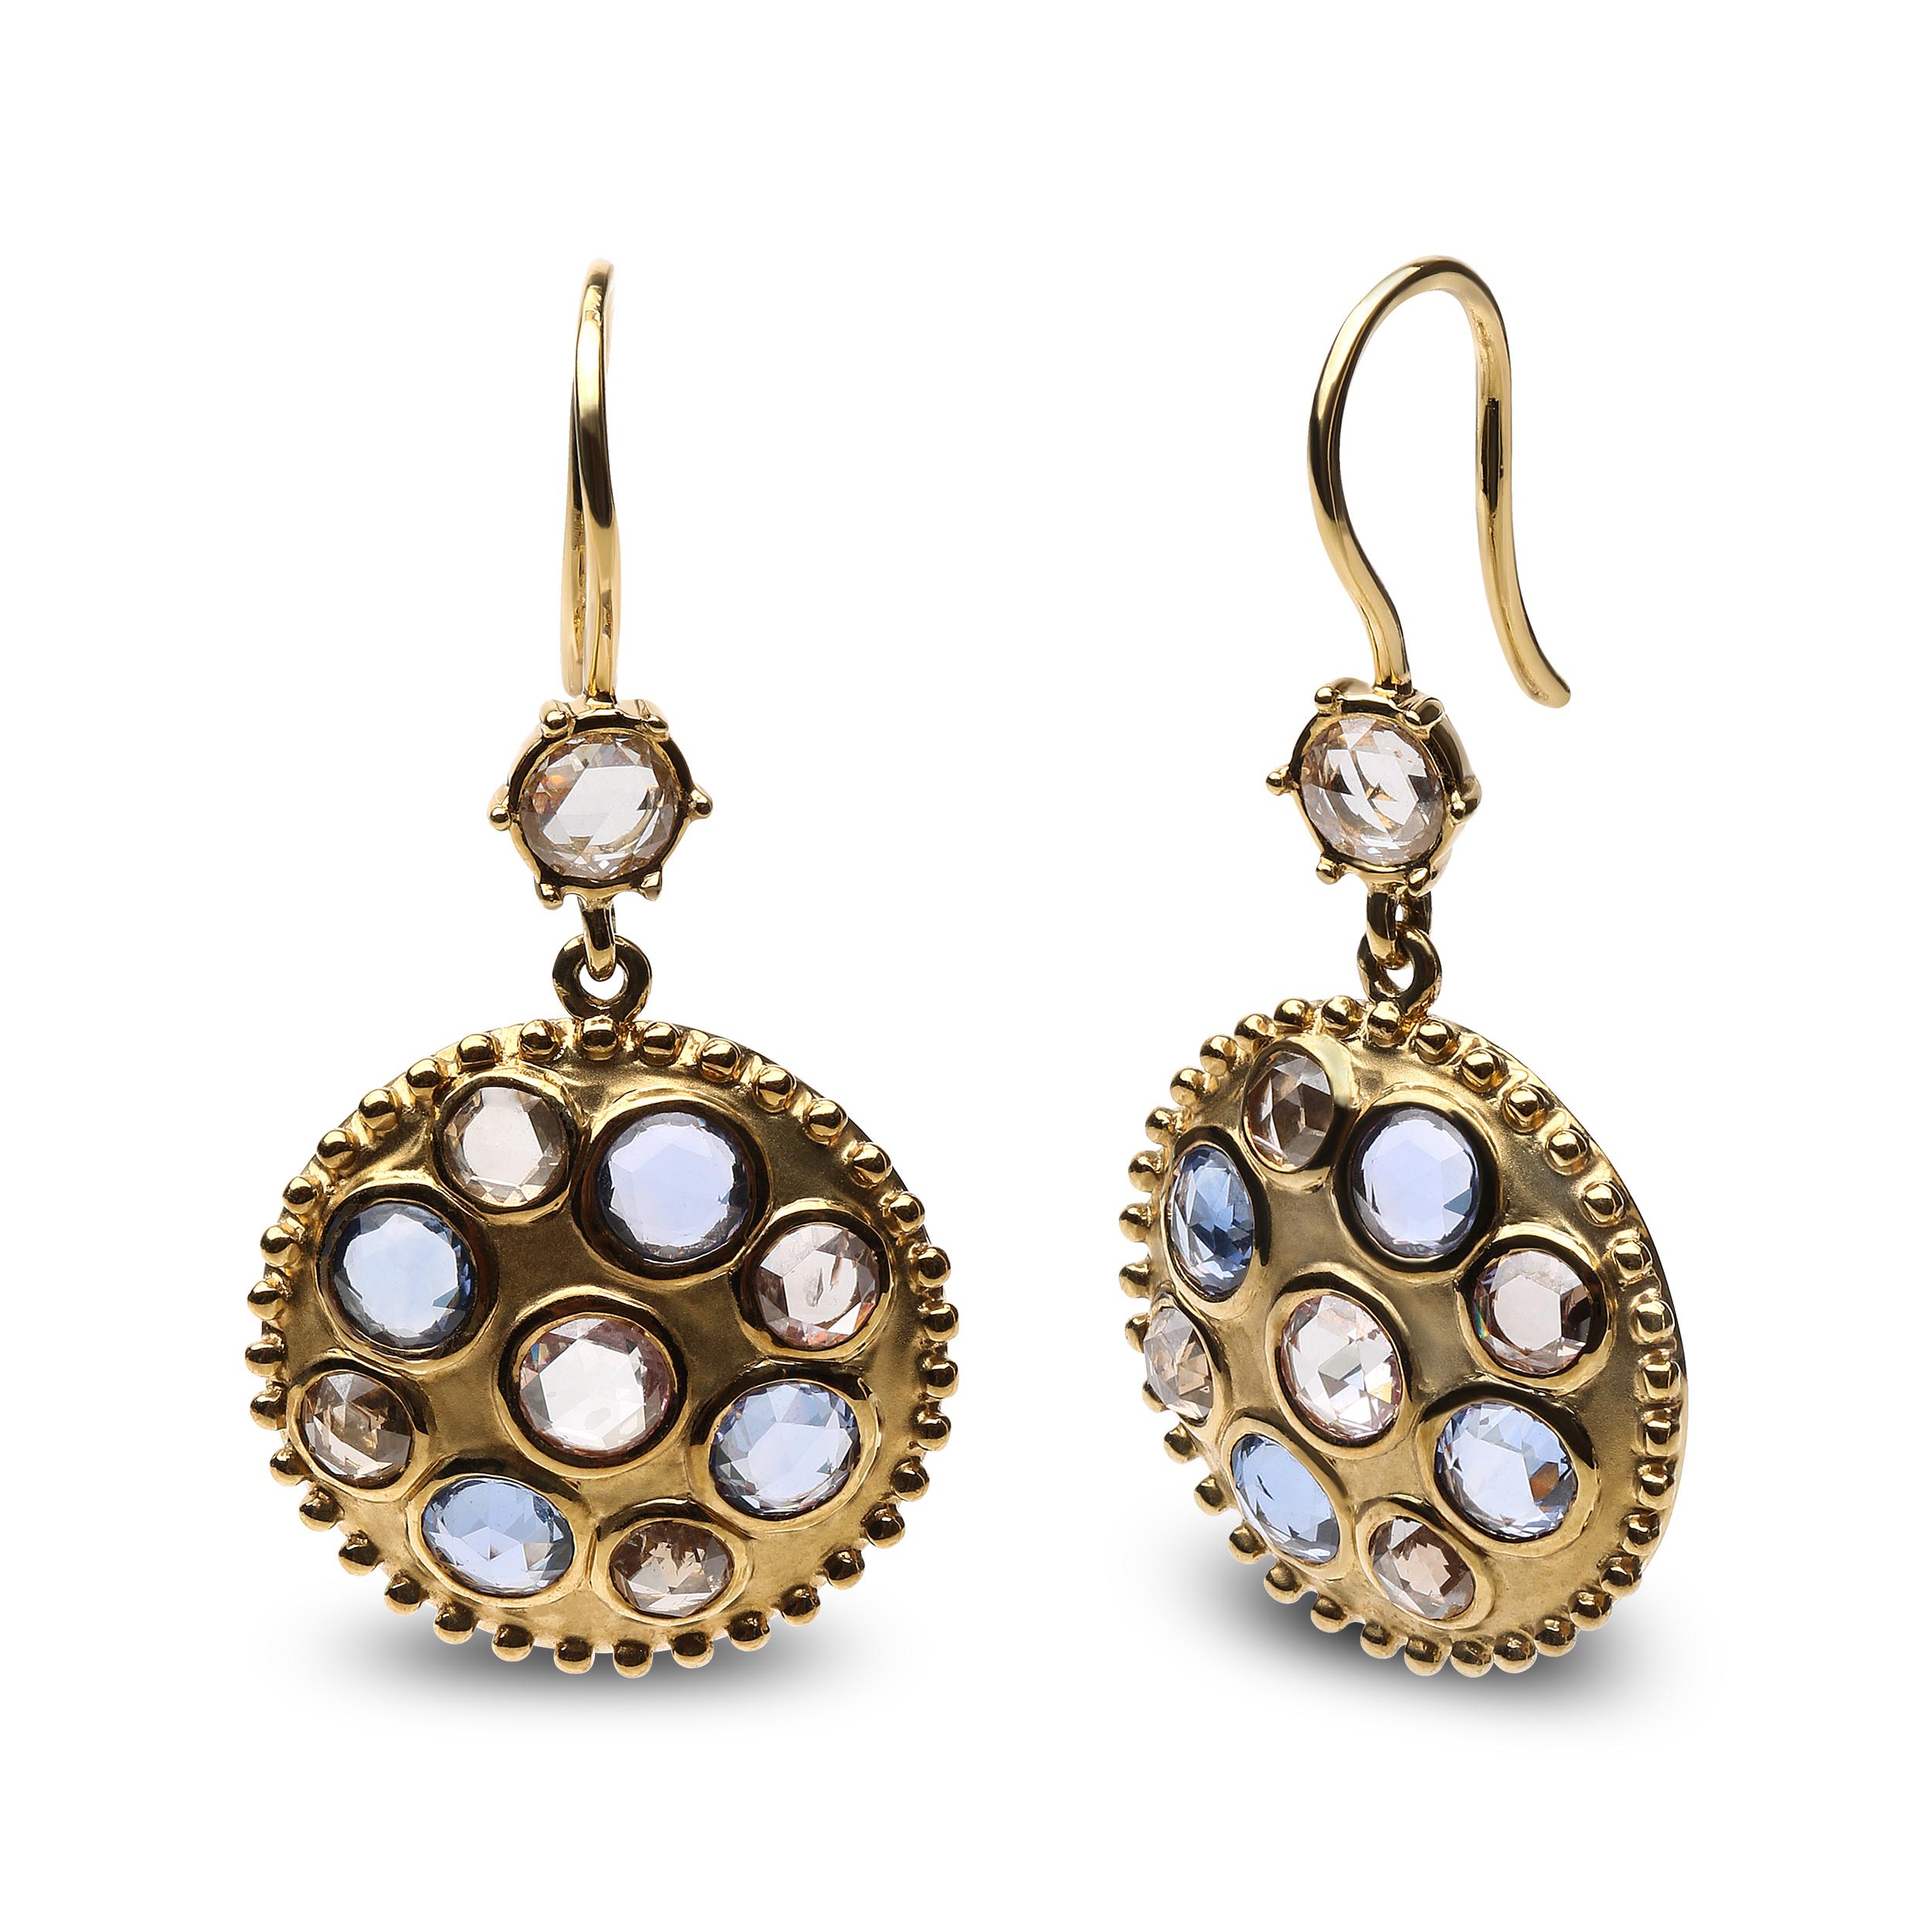 Colorful blue sapphires with brown and white diamonds combine to create a striking motif in these cluster medallion earrings made from genuine 18k yellow gold. The natural 3.5mm round heat-treated blue sapphires along with round white and